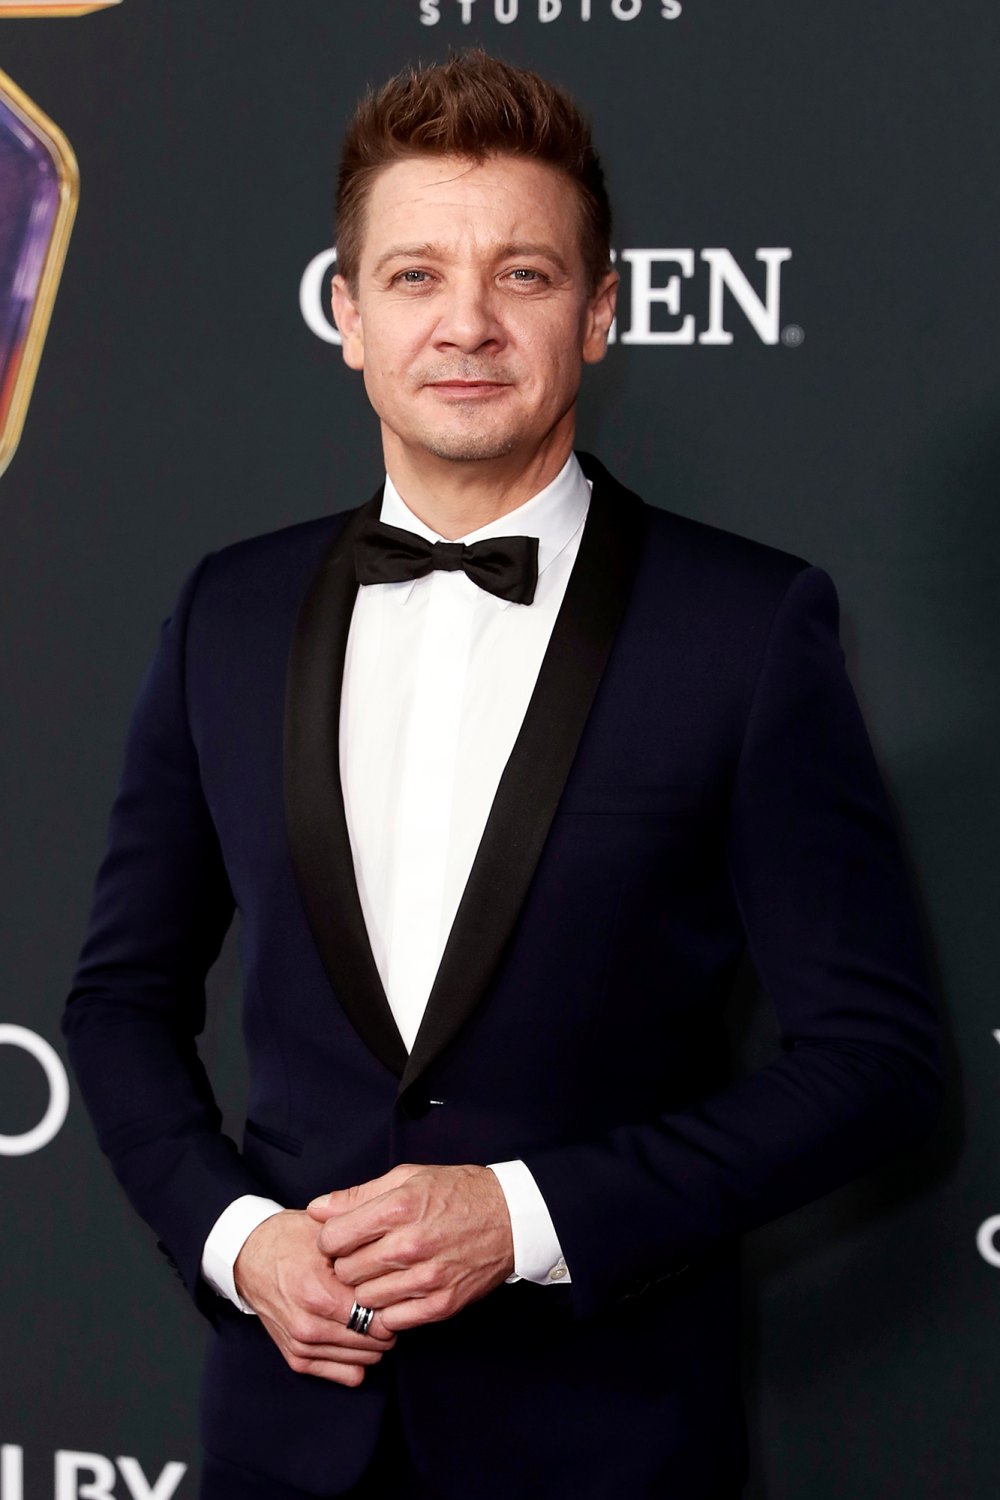 Jeremy Renner Penned a Goodbye Note to His Family While in the Hospital After Snowplow Accident: Wrote 'Last Words to My Family'